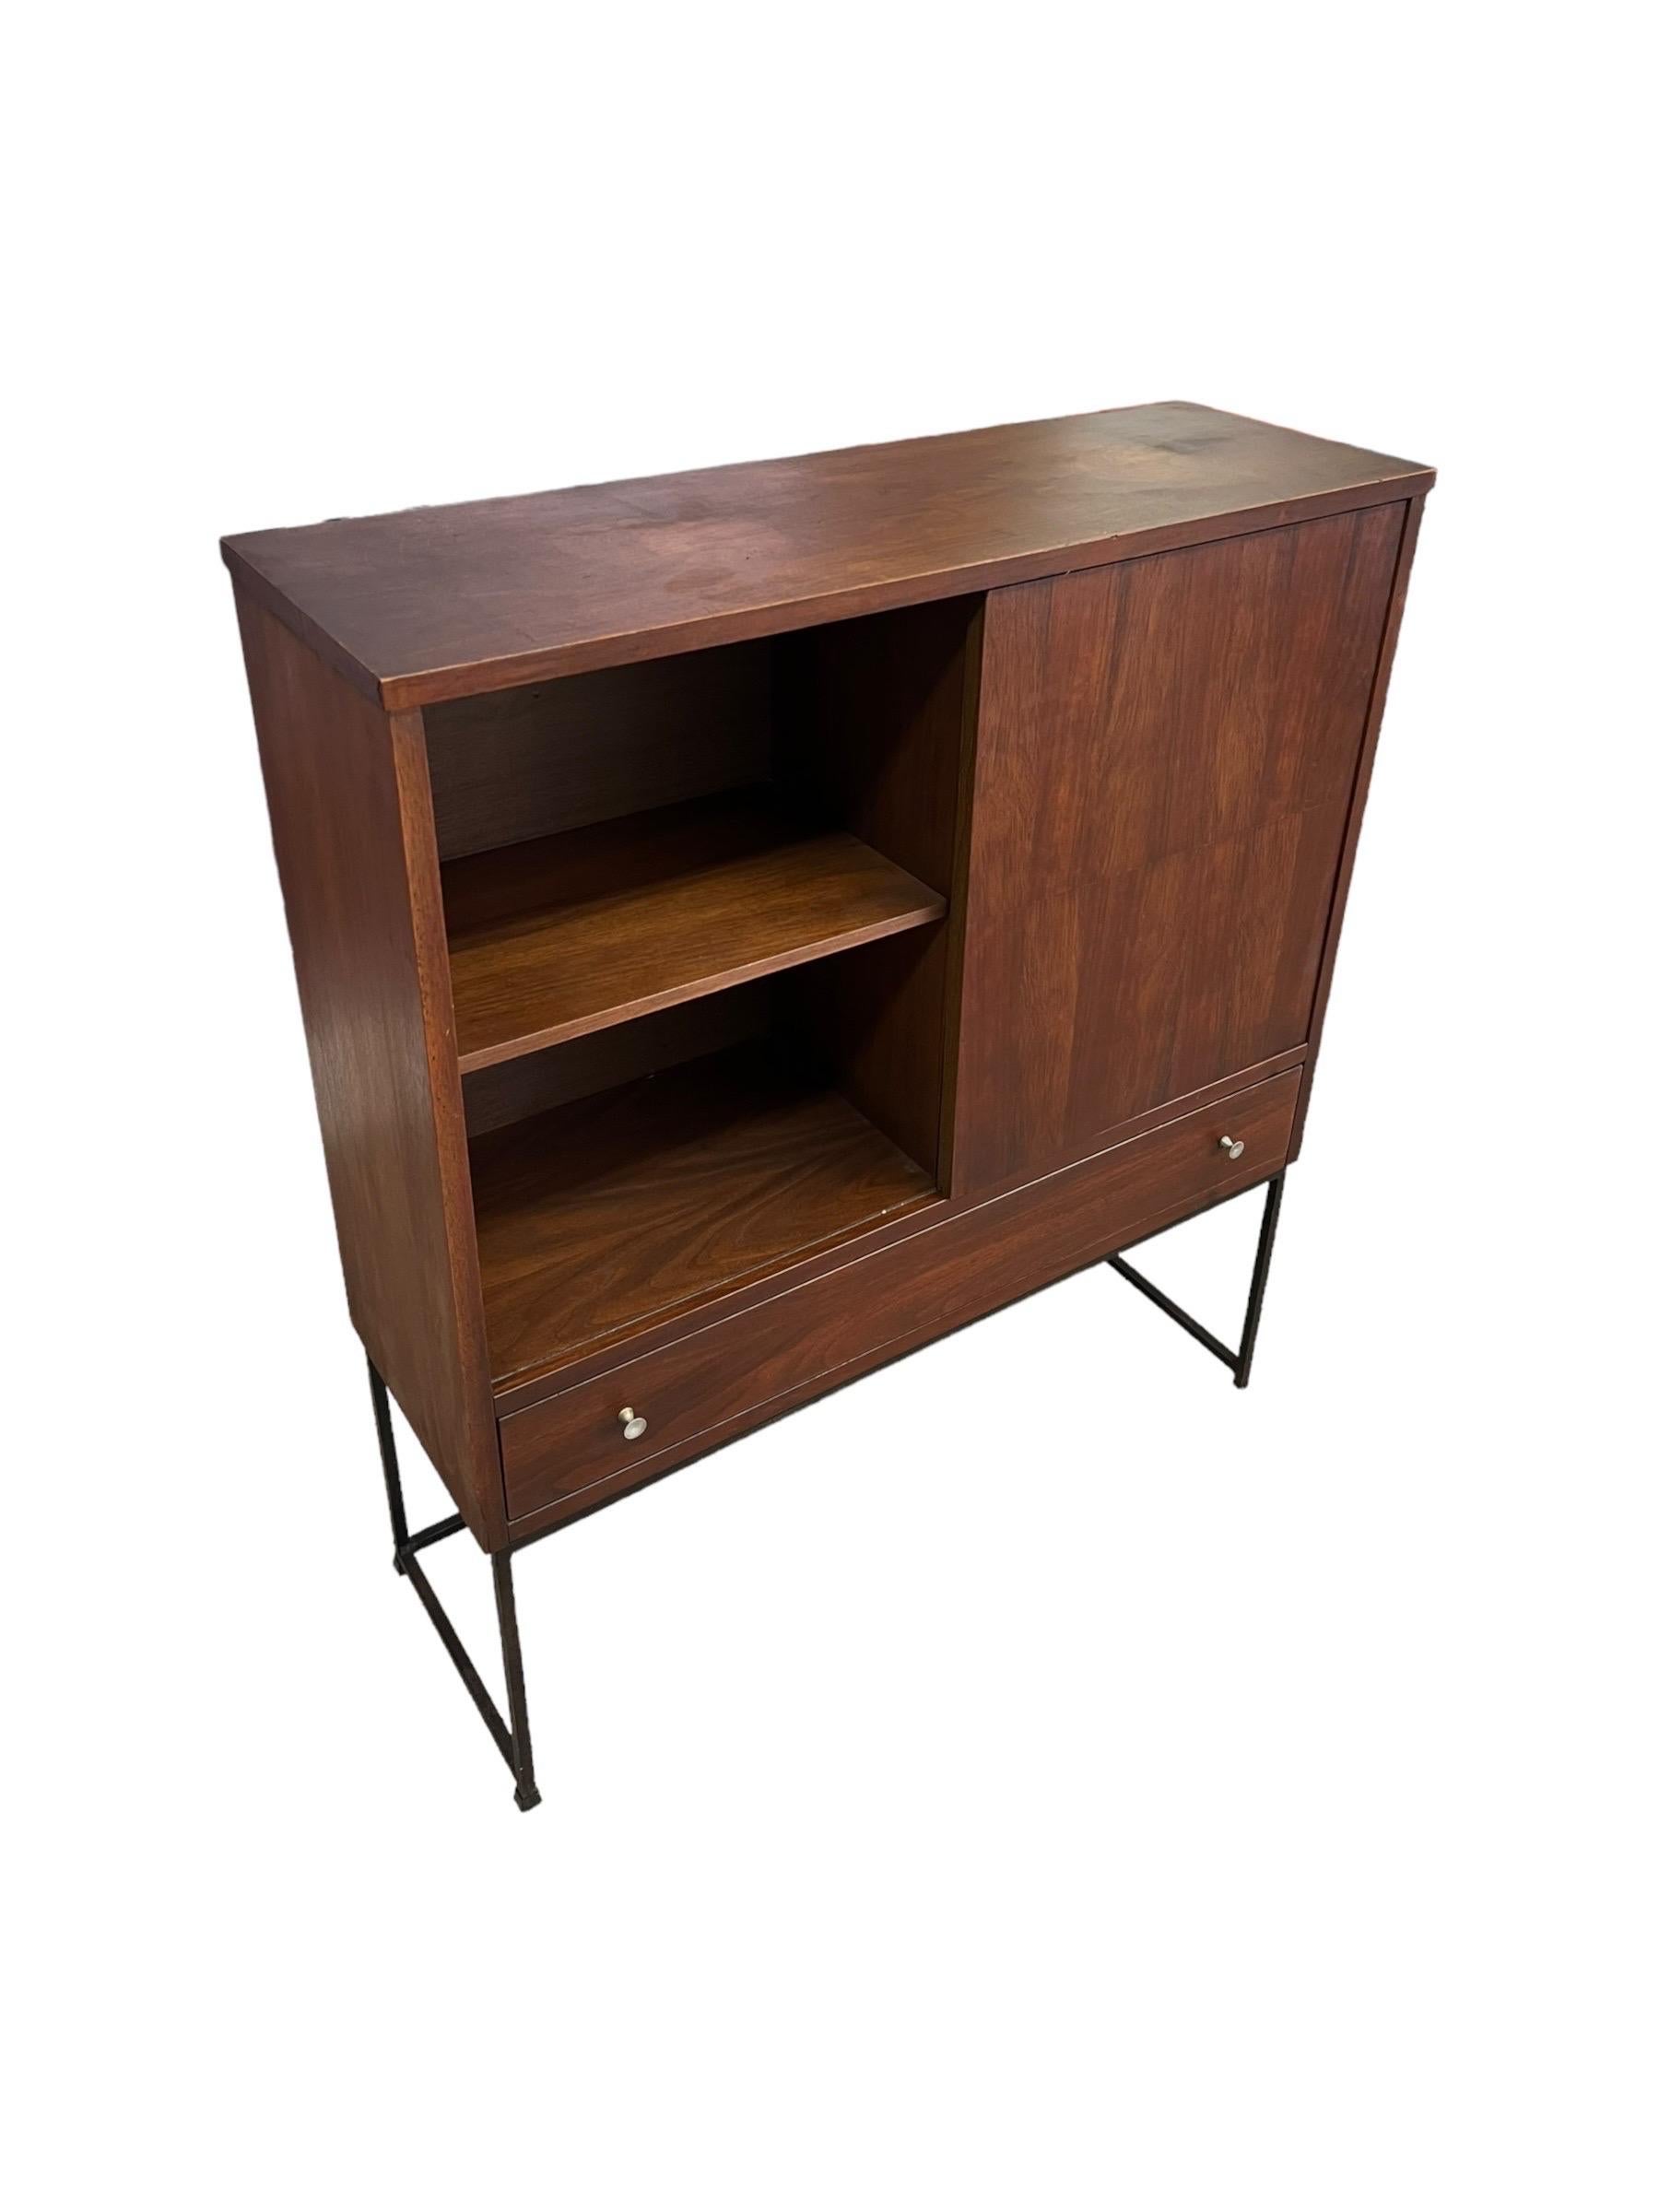 Vintage Mid Century Modern Bookshelf With Sliding Door and Dovetailed Drawers In Good Condition For Sale In Seattle, WA